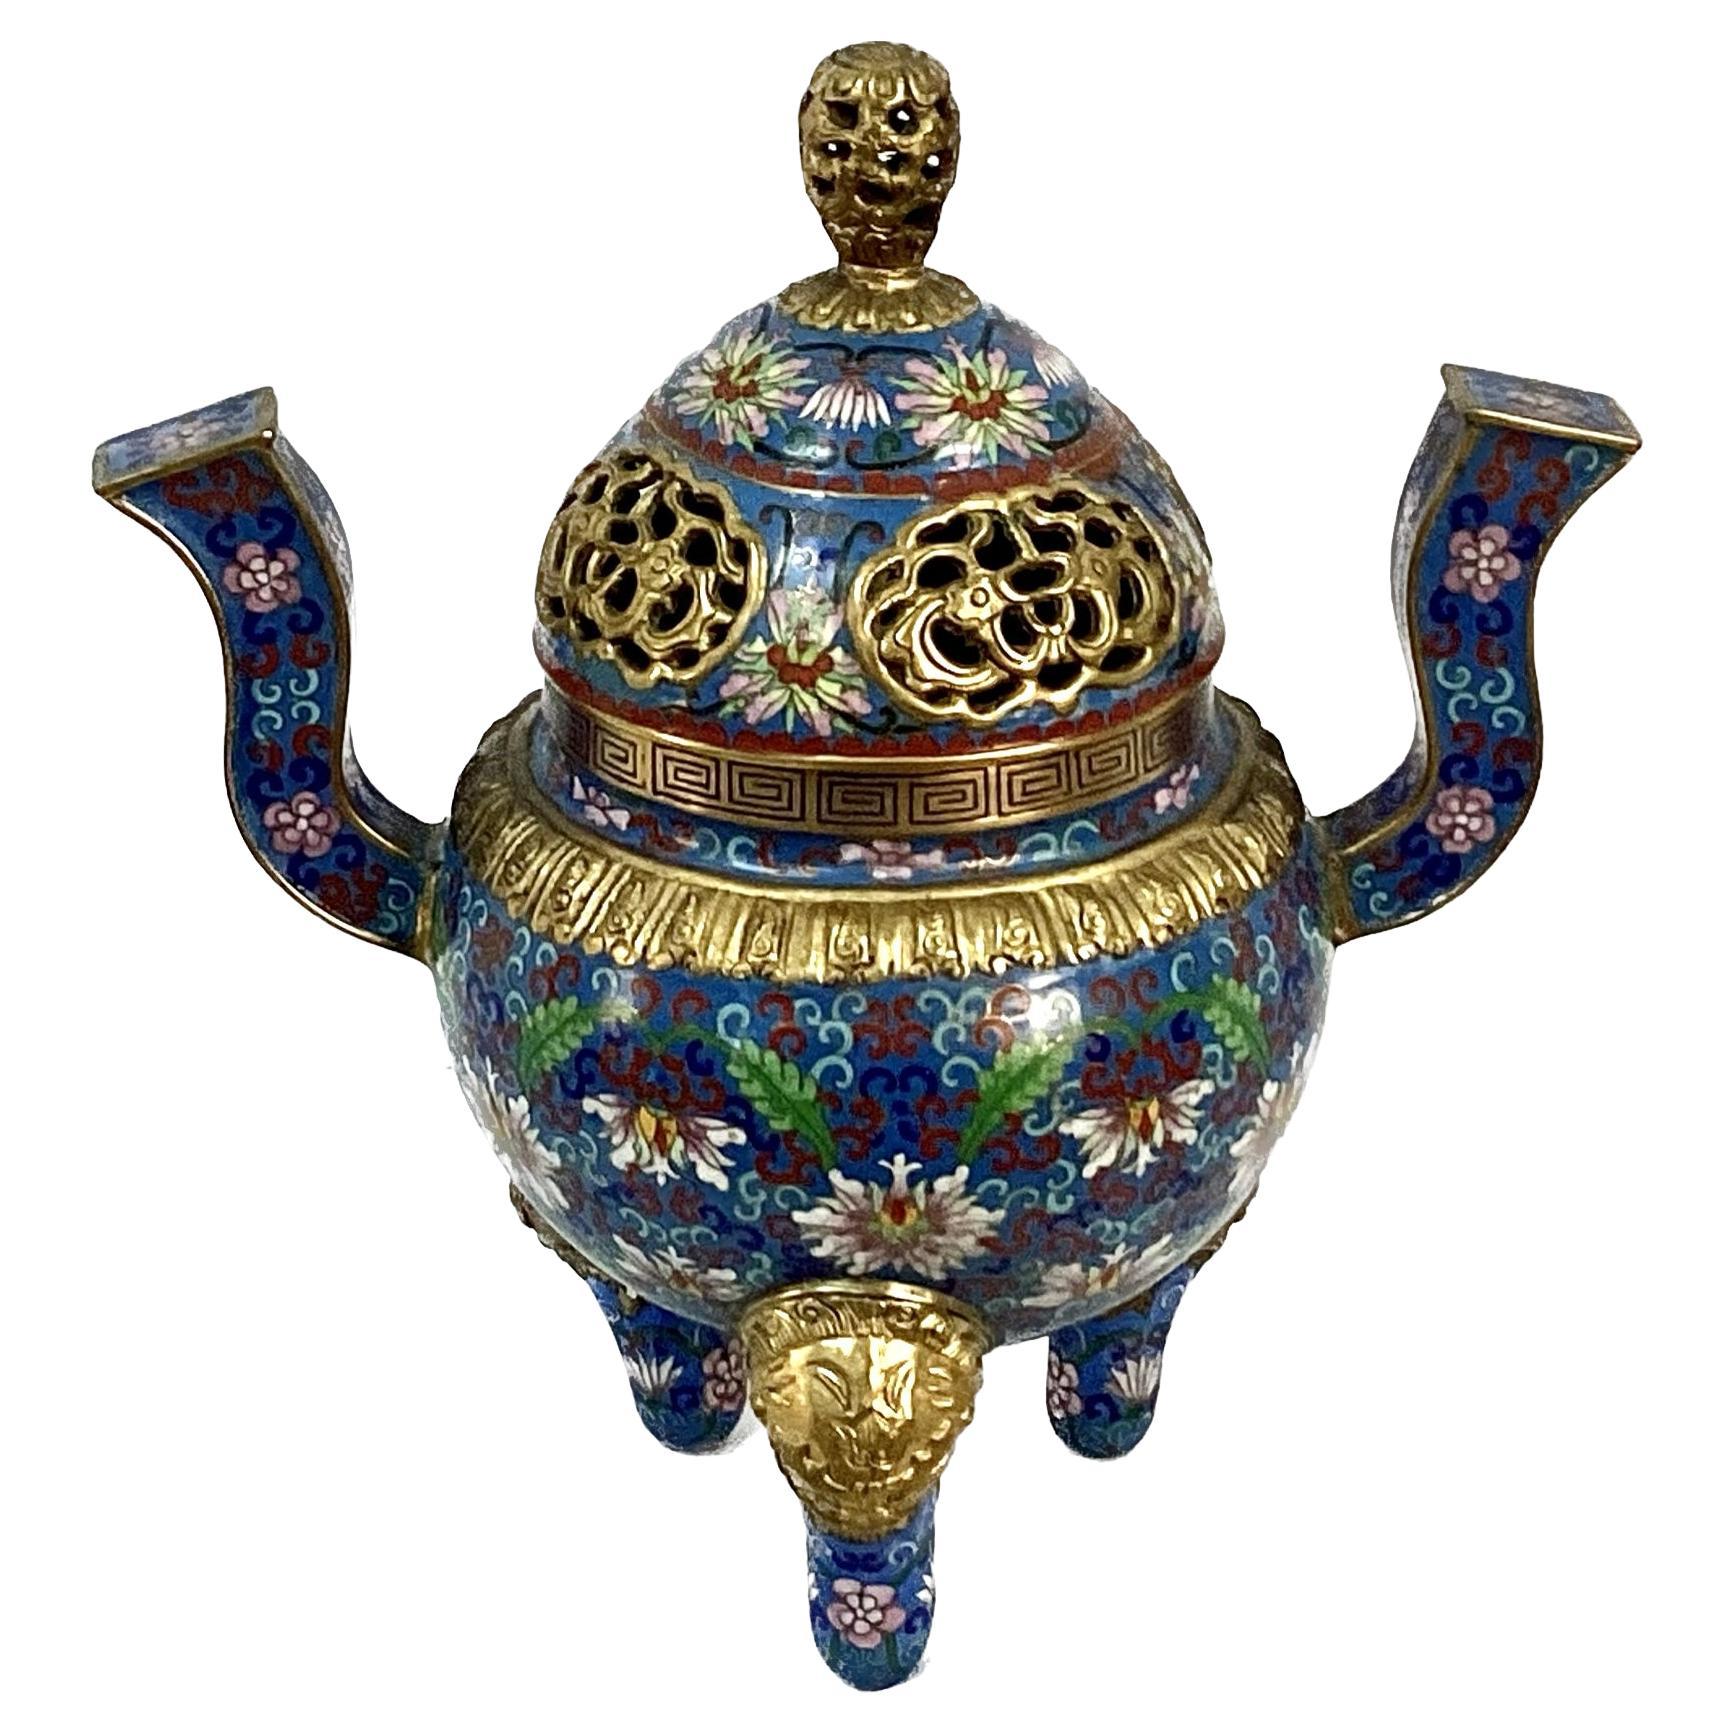 Vintage Chinese cloisonné' enamel tripod incense burner and cover. Item is raised on three legs, each covered with lion mask. Beautiful lotus scroll in colors of rich blues, pinks, whites, and greens. Inside is solid turquoise. Brass finial on top